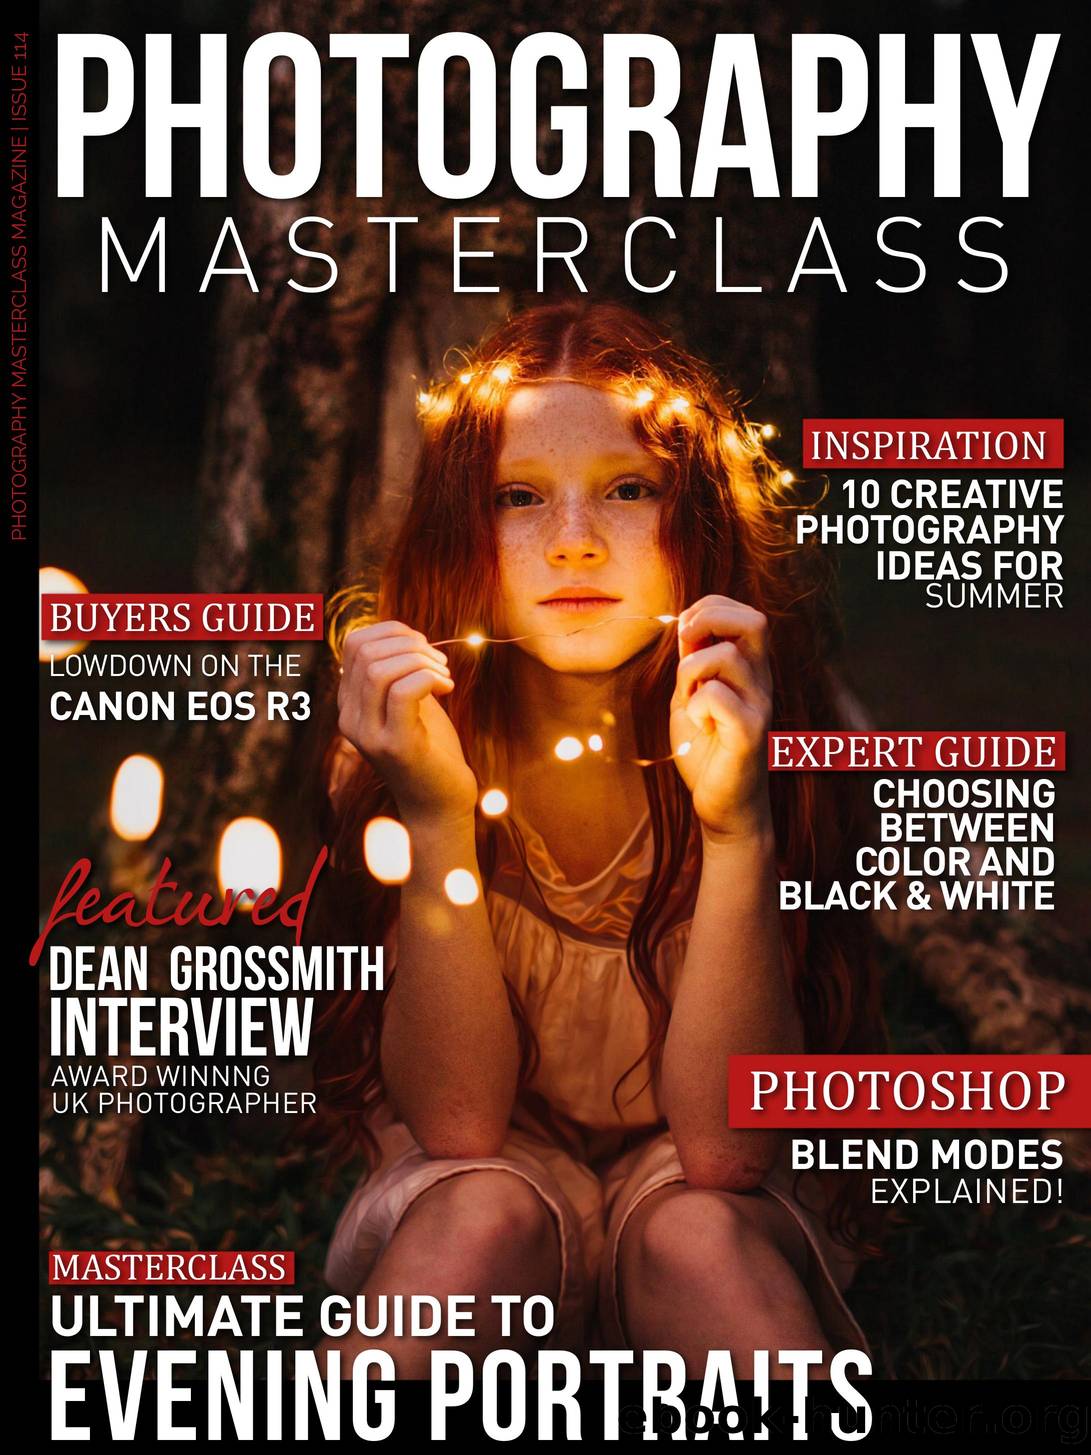 Photography Masterclass by Issue 114